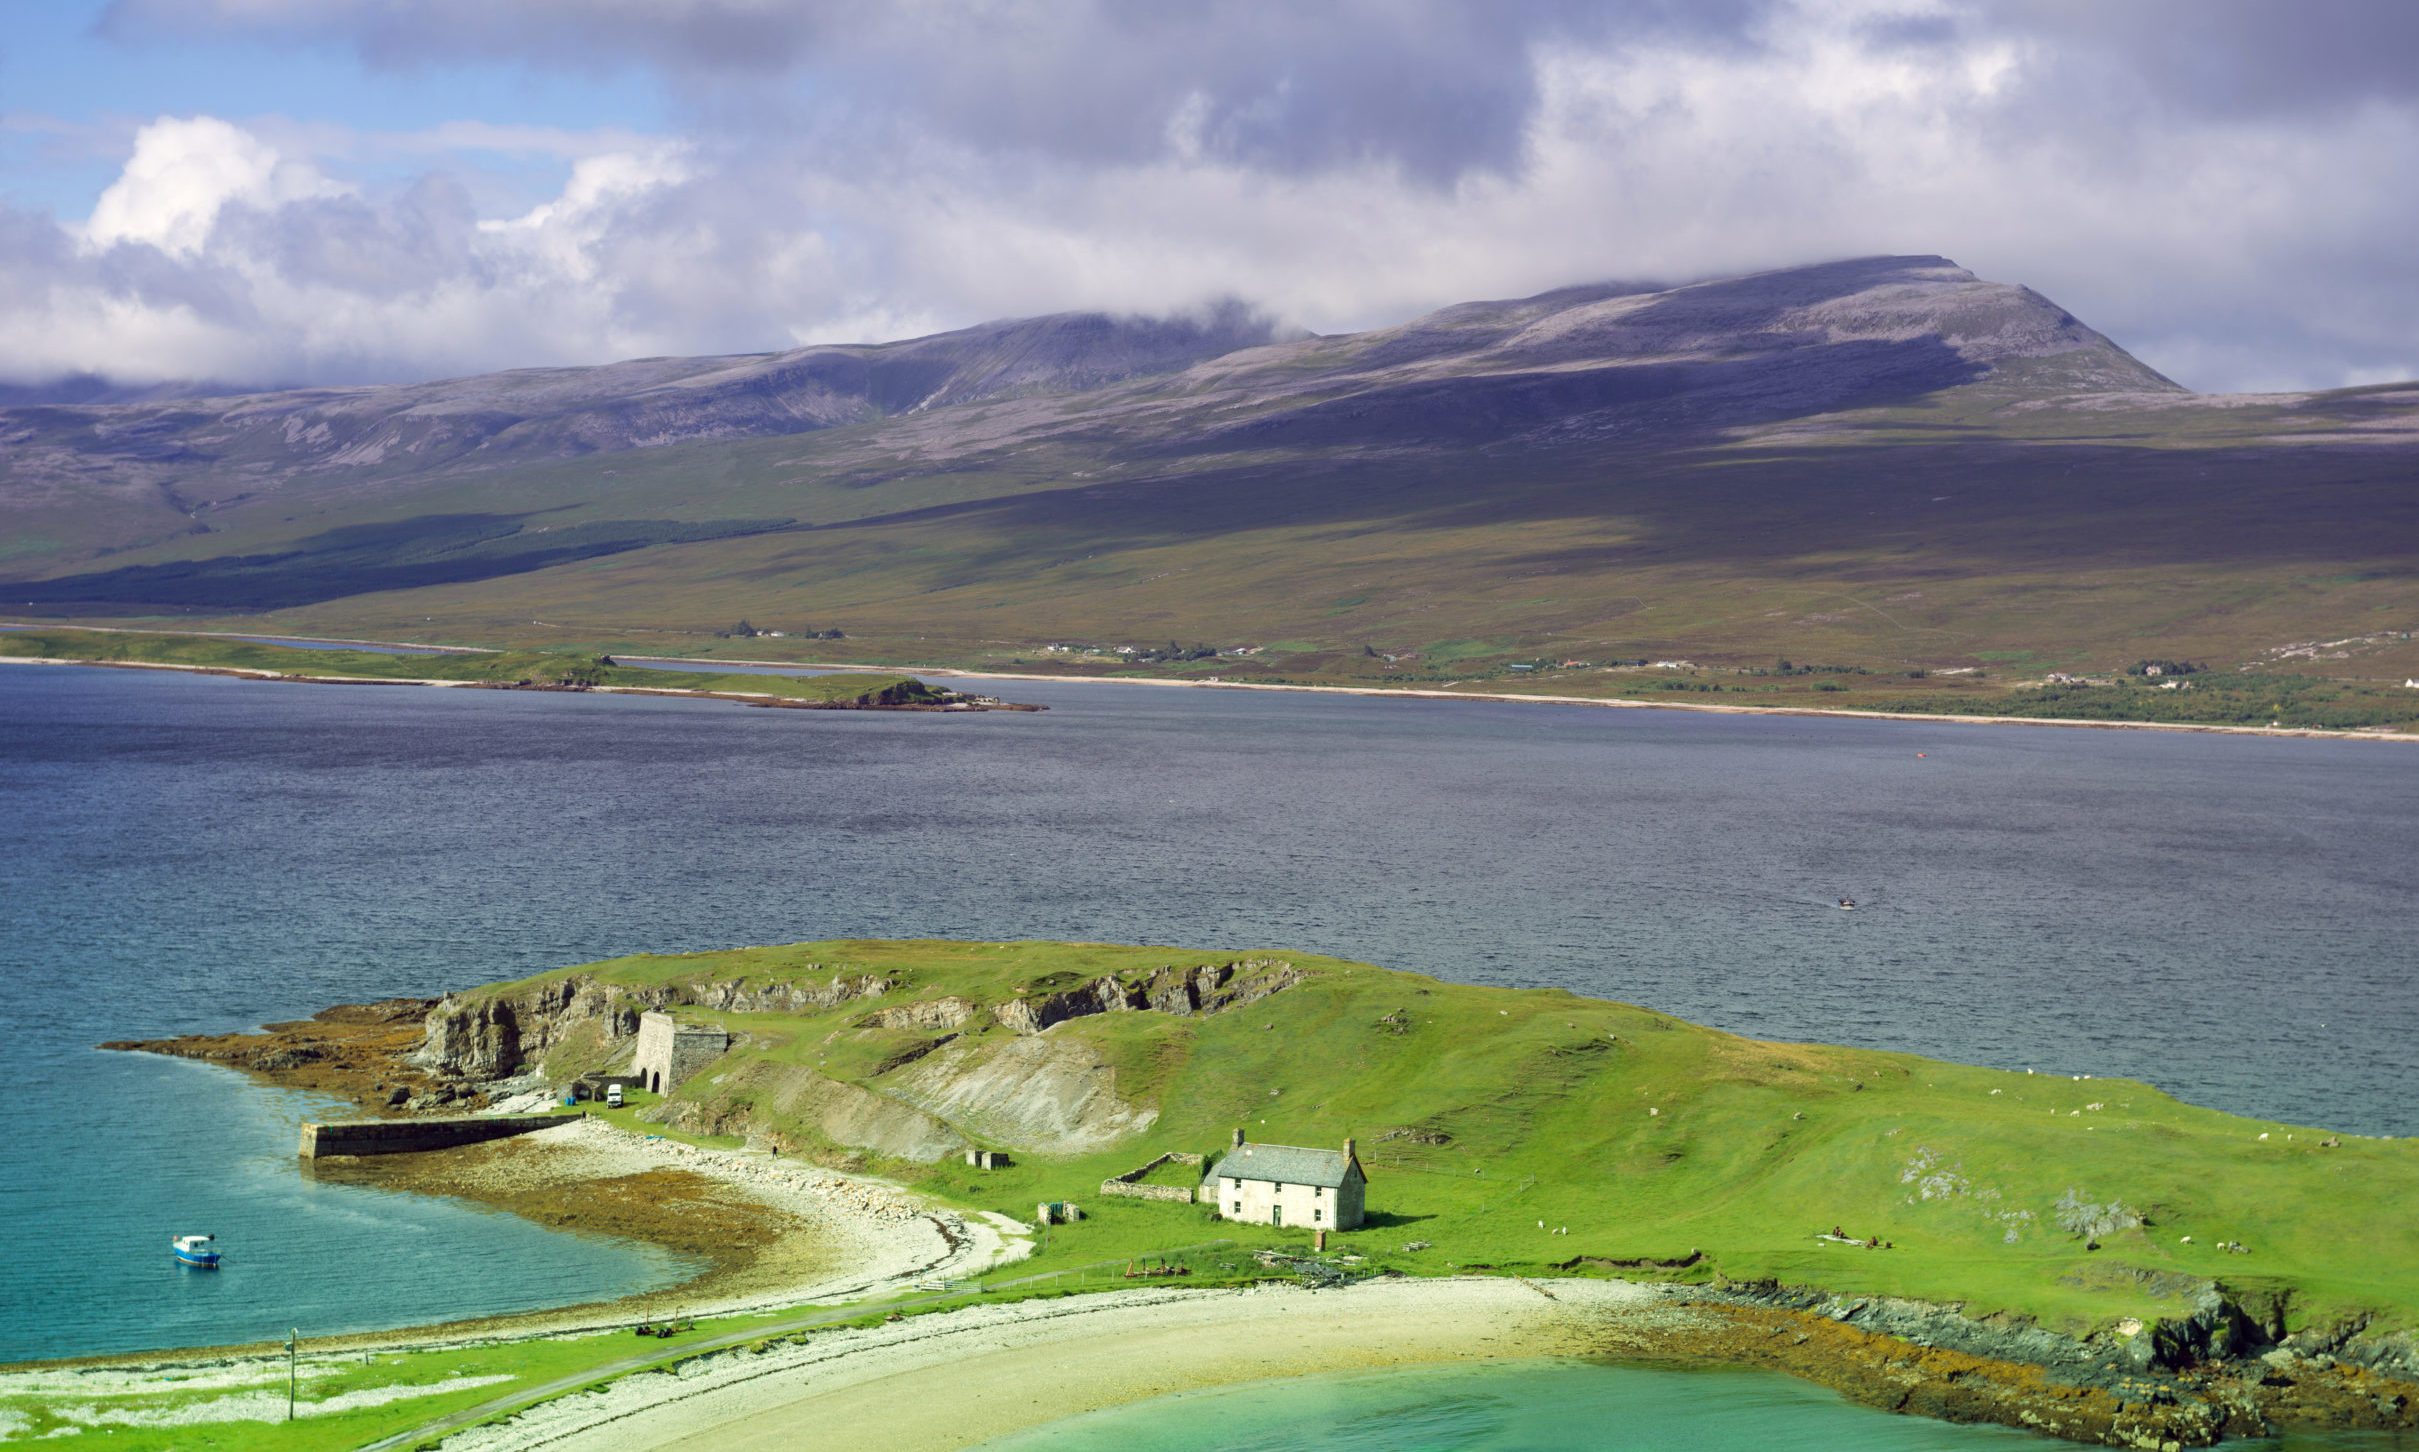 The incident took place at Loch Eriboll on Friday.